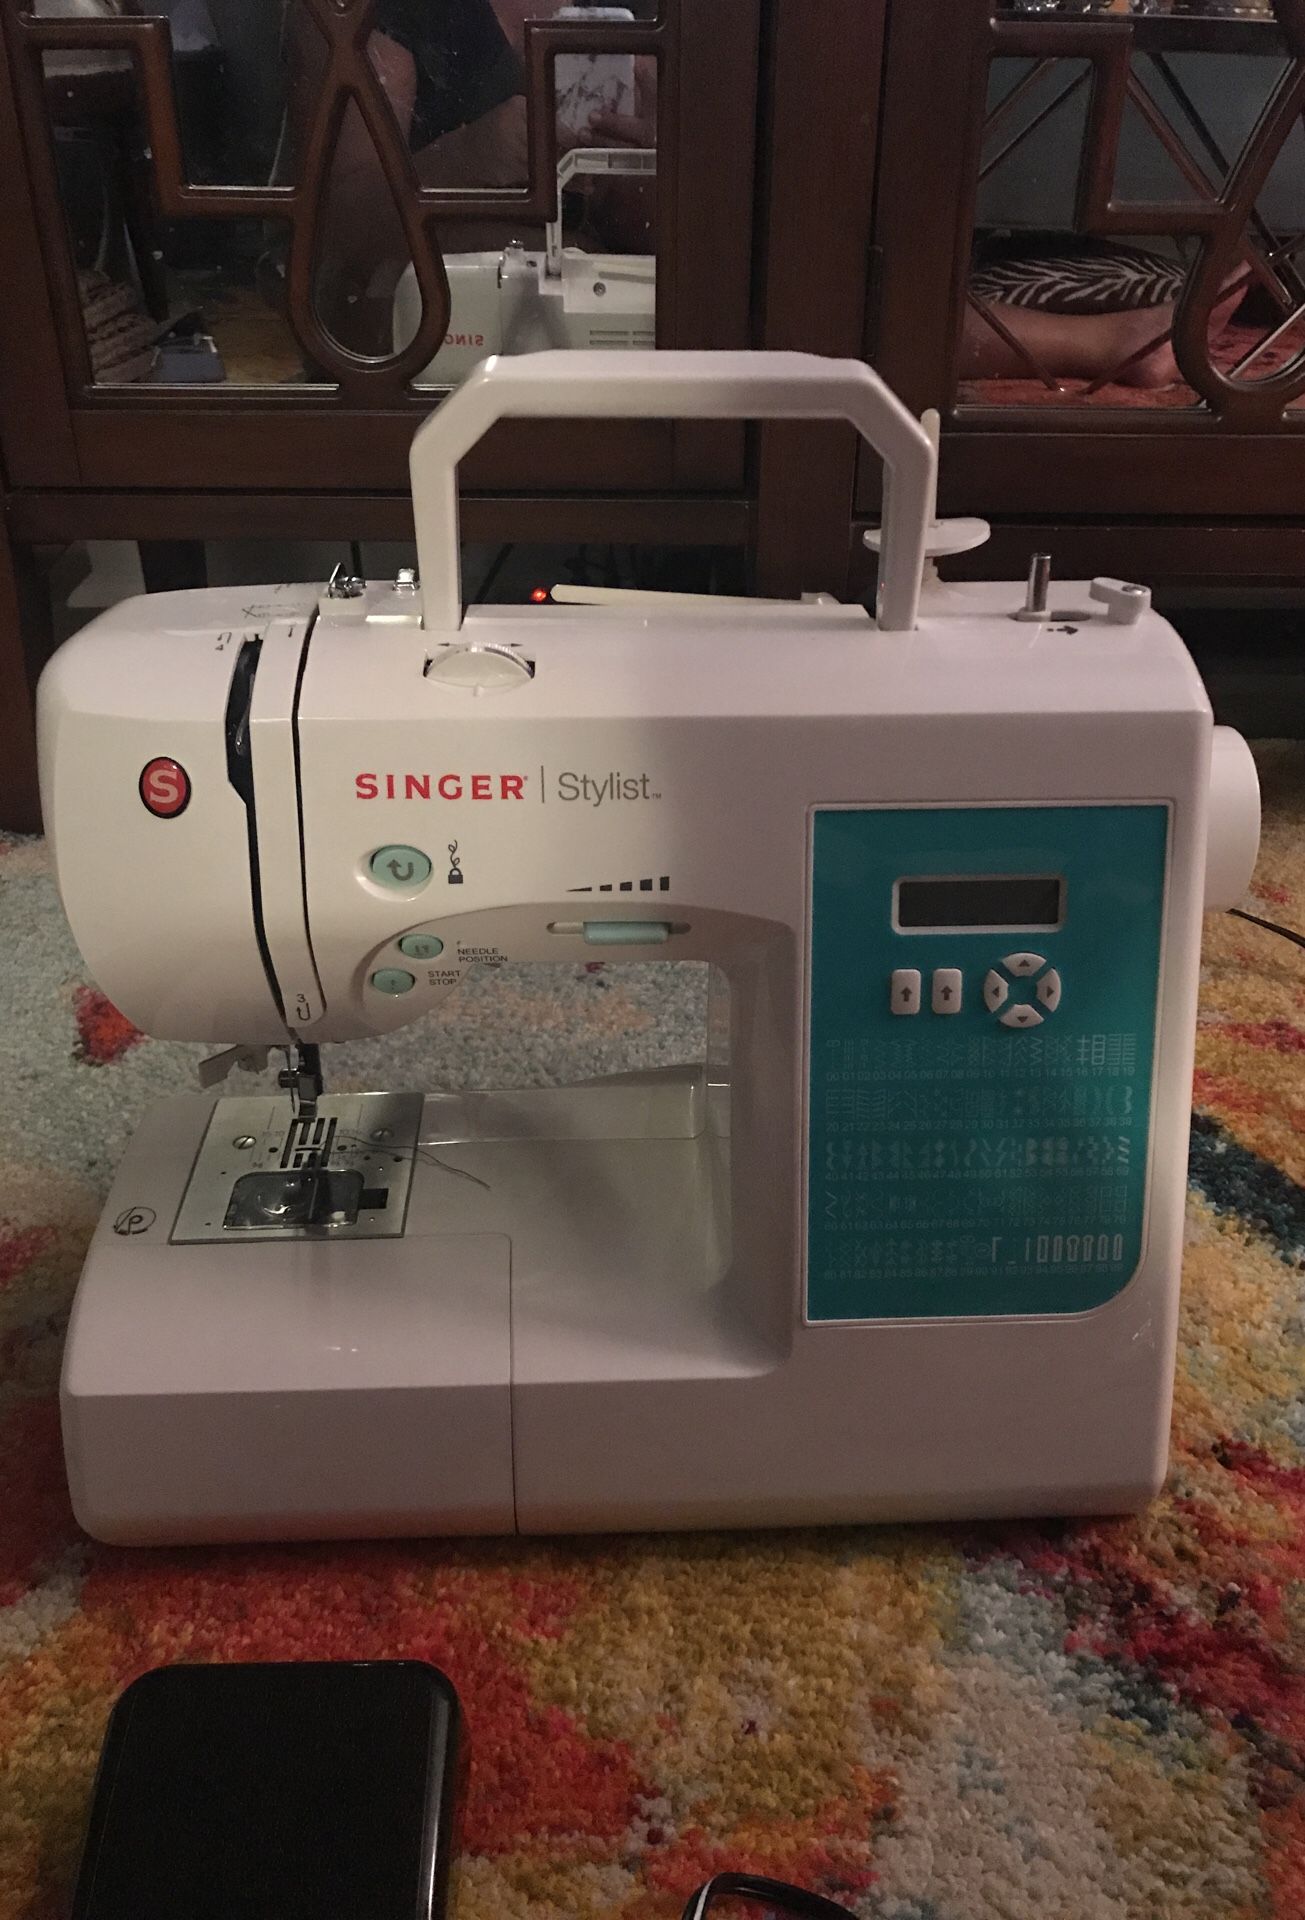 Singer Stylist 7258 barely used!!!